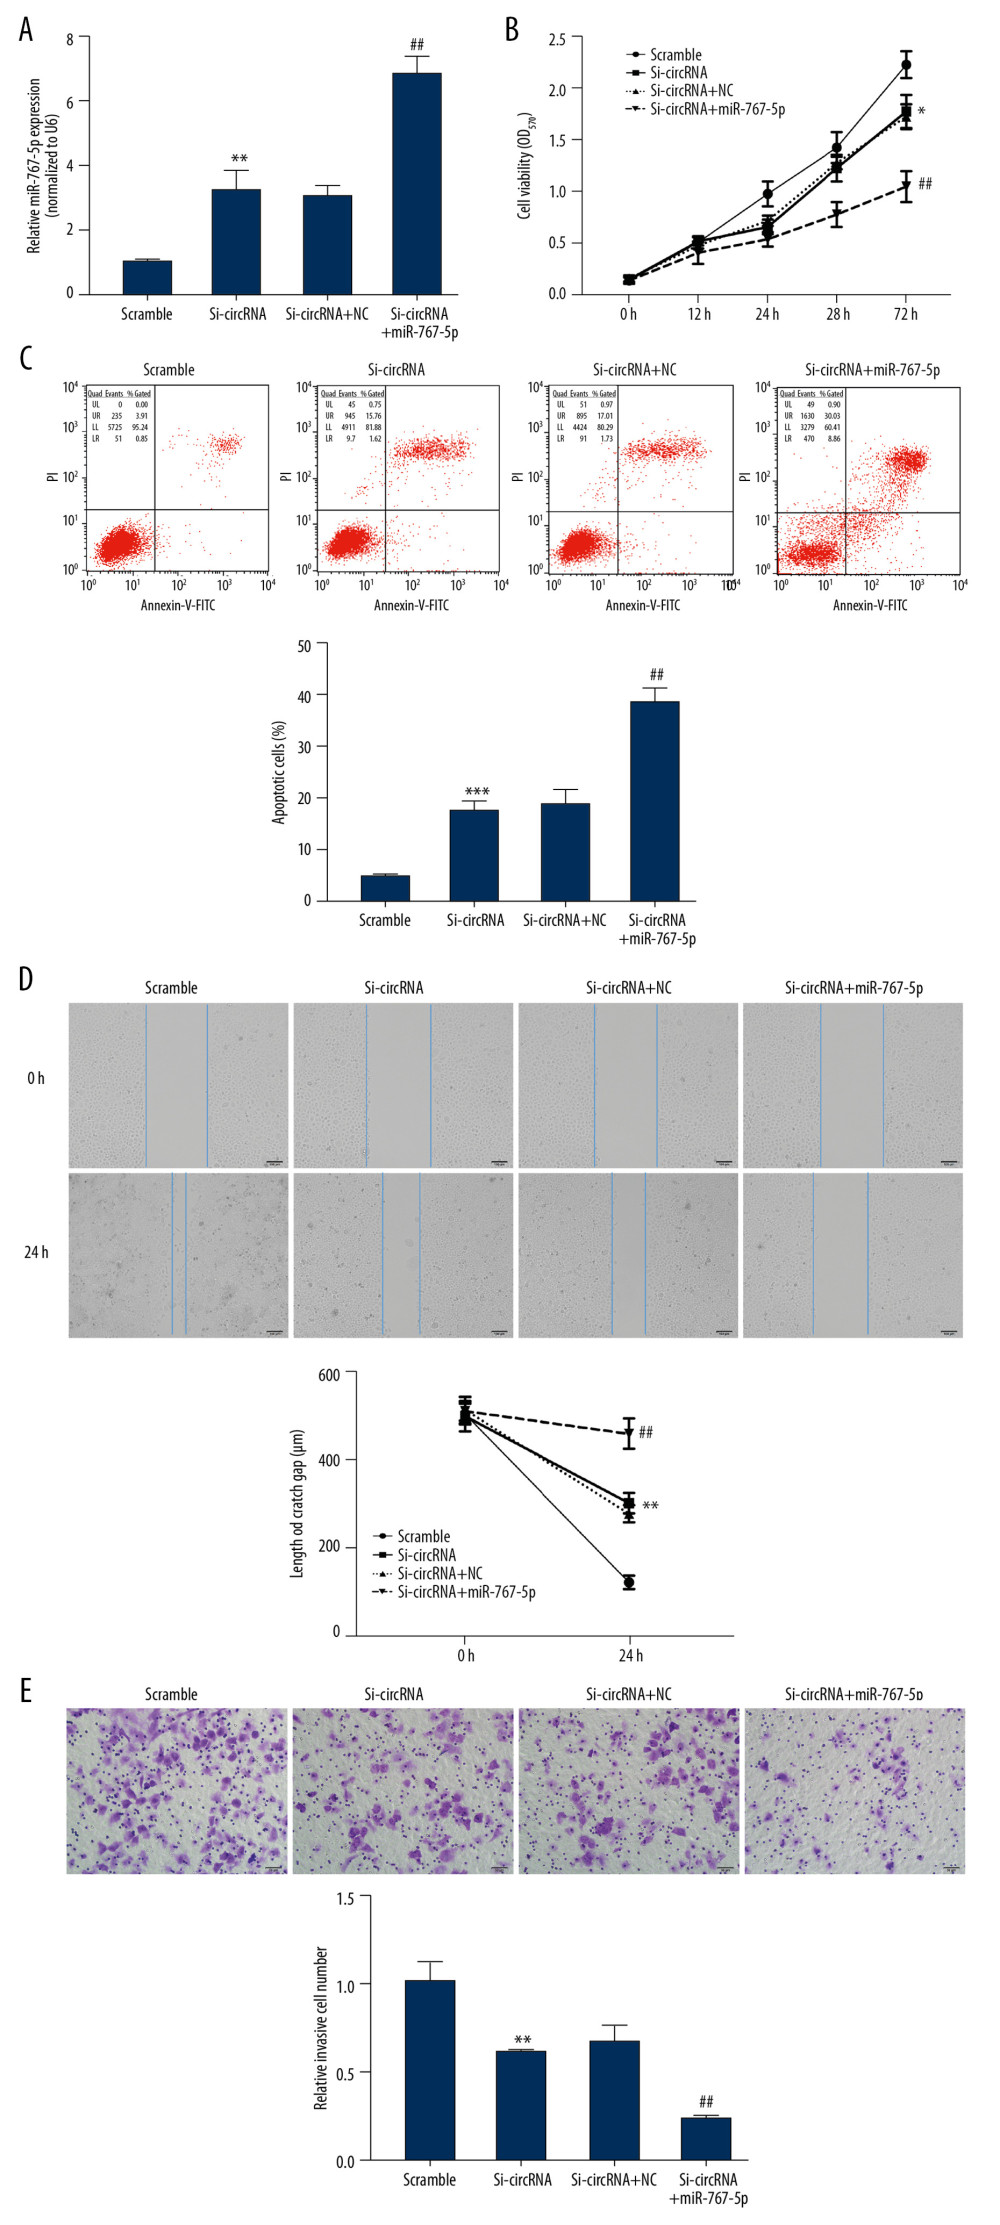 miR-767-5p transfection enhanced the inhibitory impacts of circ_0005556 knockdown on GC cells. (A) Expression of miR-767-5p was analyzed by qRT-PCR in GC cells transfected with si-circ_0005556 or miR-767-5p (** P<0.01 vs. scrambled group, ## P<0.01 vs. si-circRNA+NC group). (B) GC cell viability, (C) apoptosis, (D) migration, and (E) invasion were estimated by MTT, flow cytometry, wound-healing, and transwell assays, respectively, after transfection with si-circ_0005556 or miR-767-5p (** P<0.01 vs. scrambled group, ## P<0.01 vs. si-circRNA+NC group).